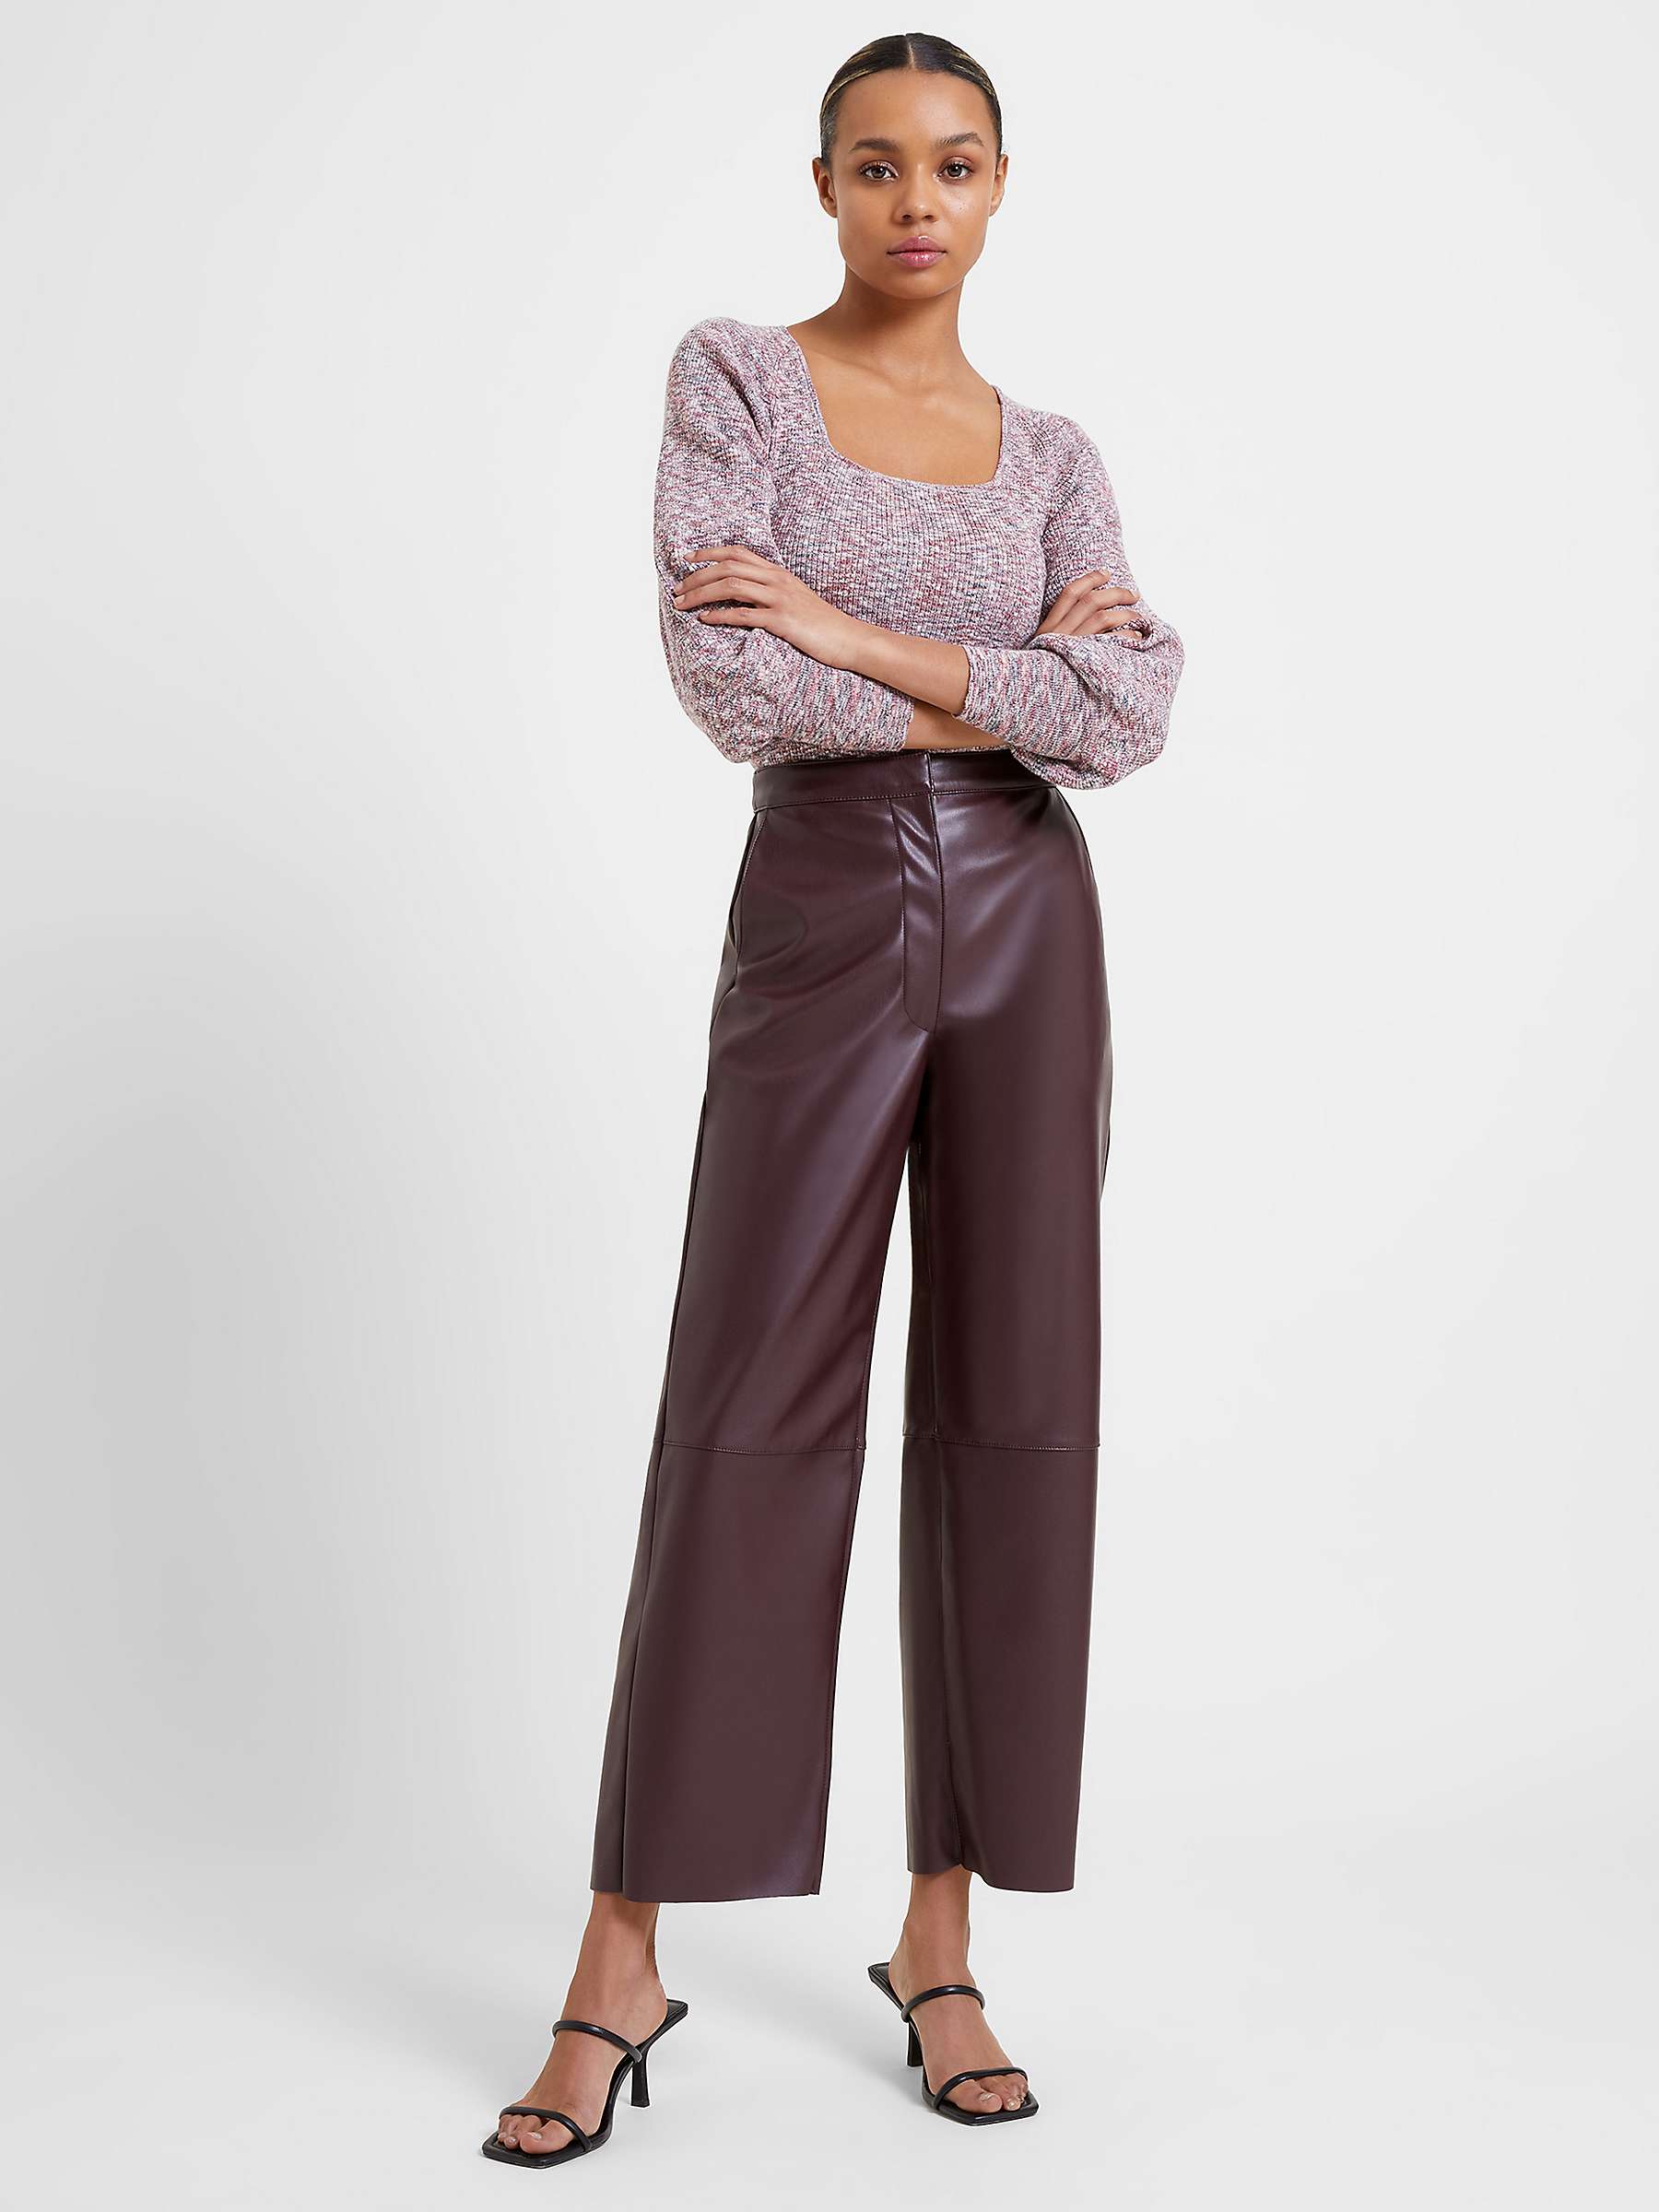 Best leather trousers: Real and faux leather trousers